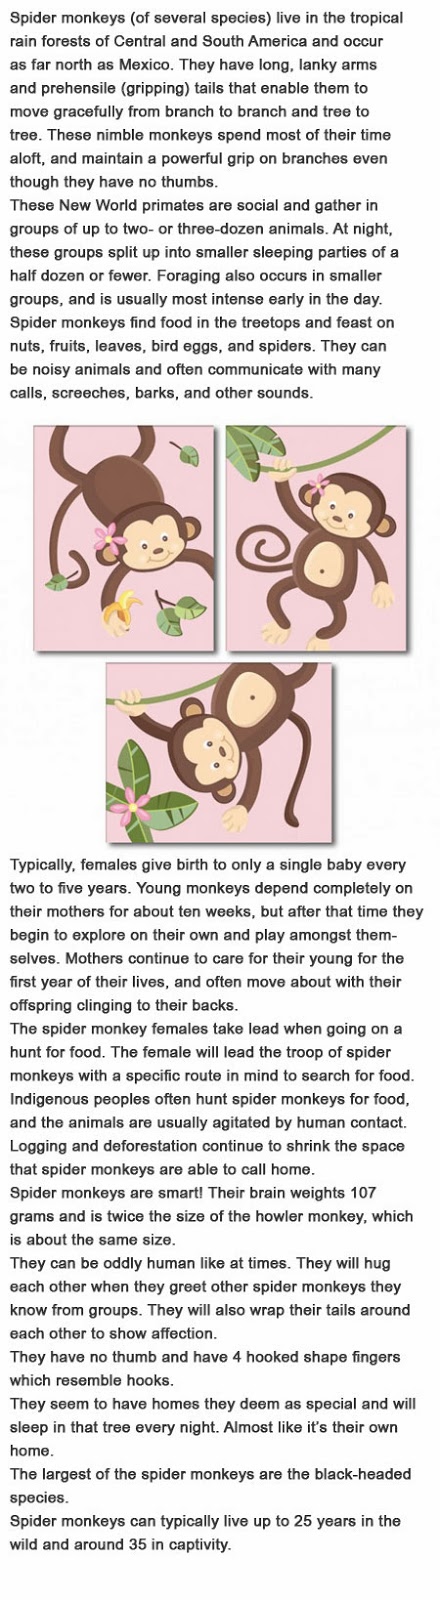 Spider monkey facts for kids